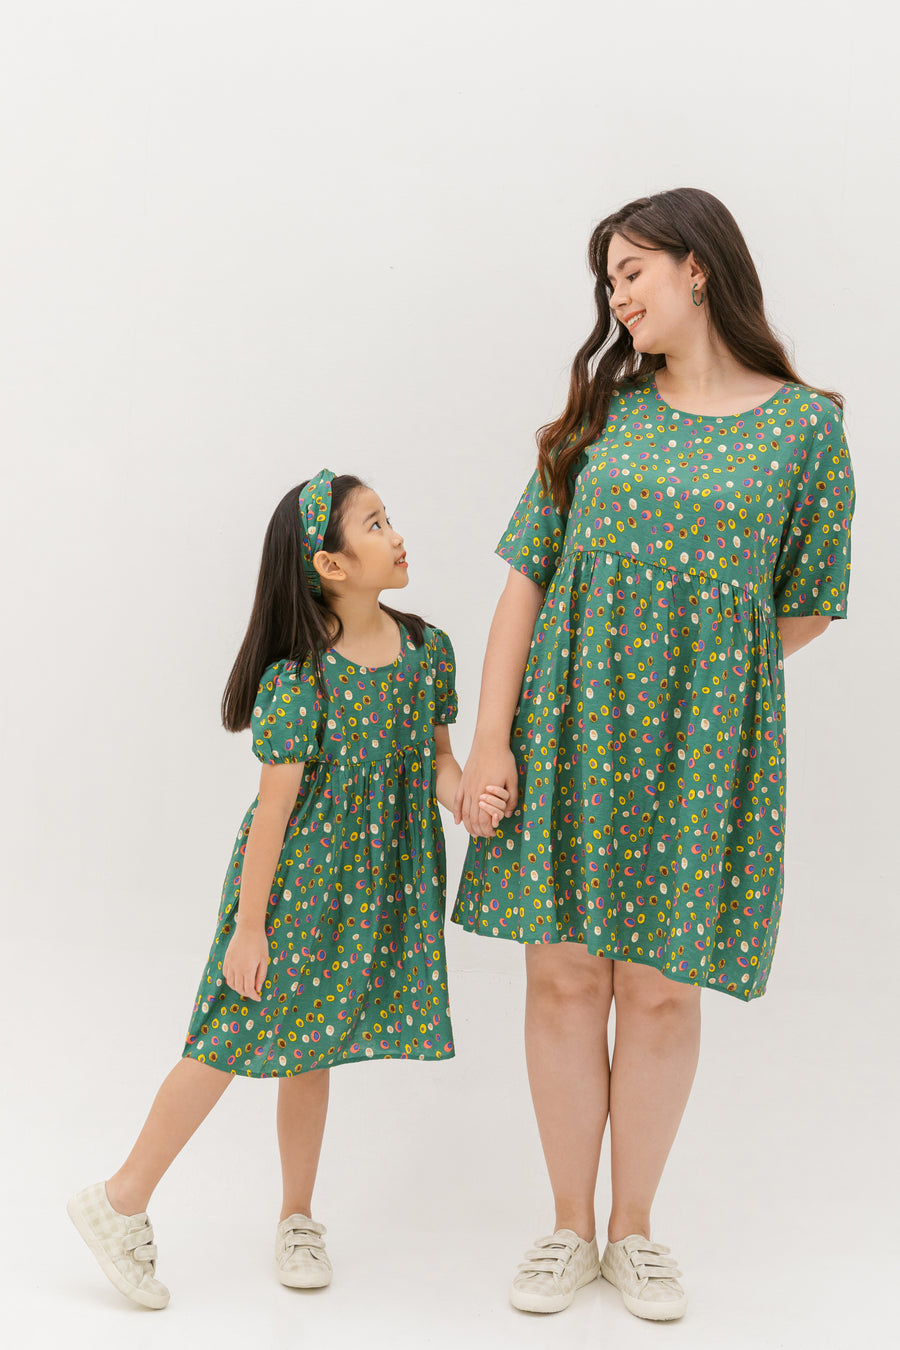 Denise Colourful Dots Dress In Green